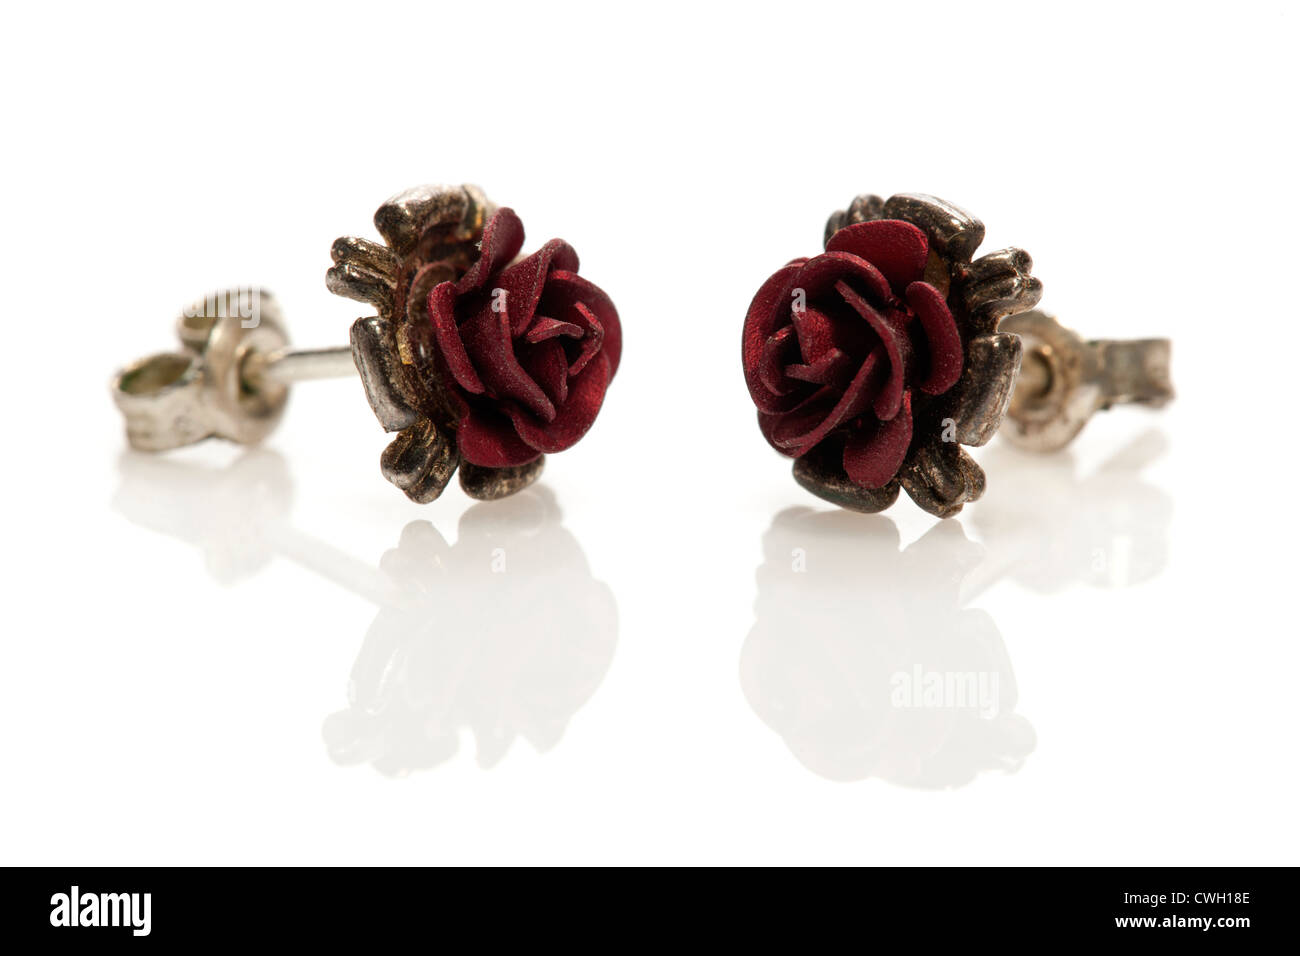 Pair of small red rose stud earrings Stock Photo